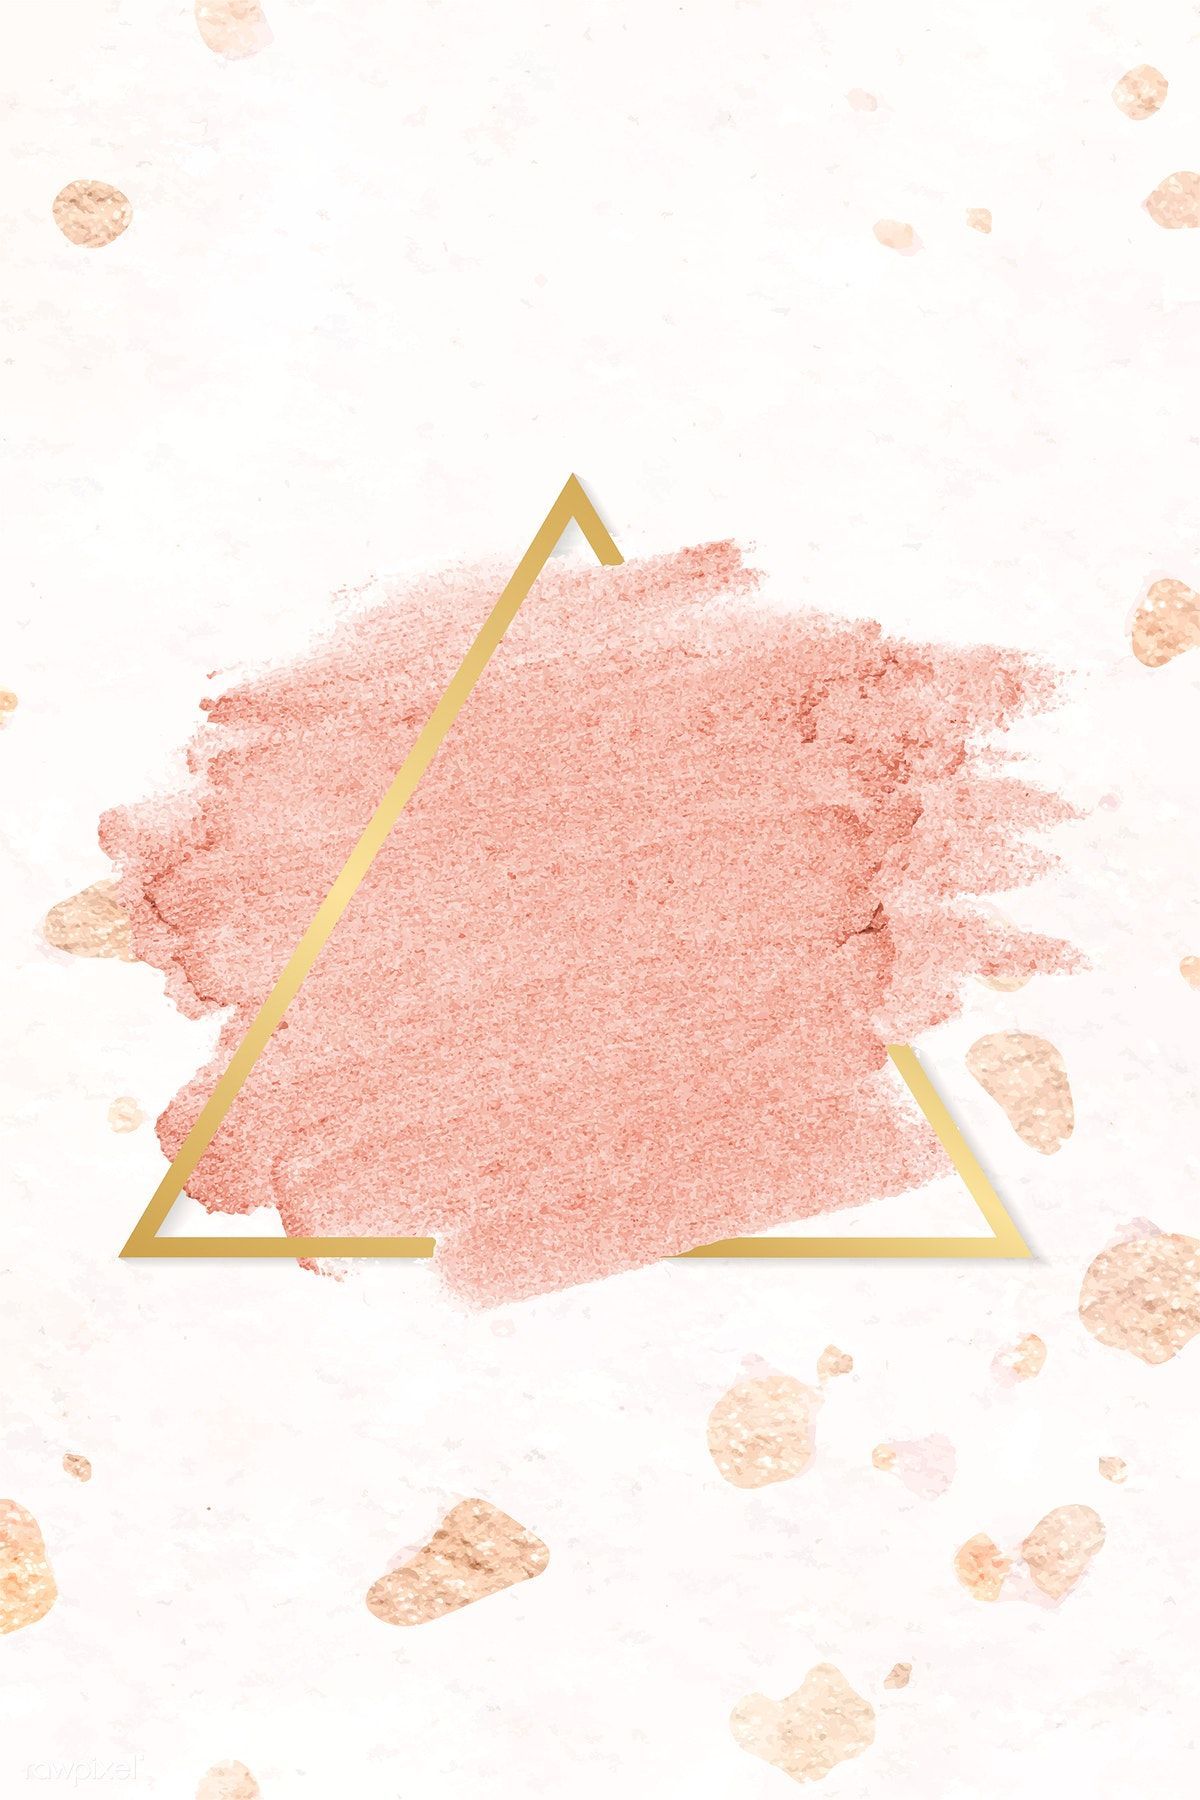 Pastel pink paint with a gold triangle frame on a light pink